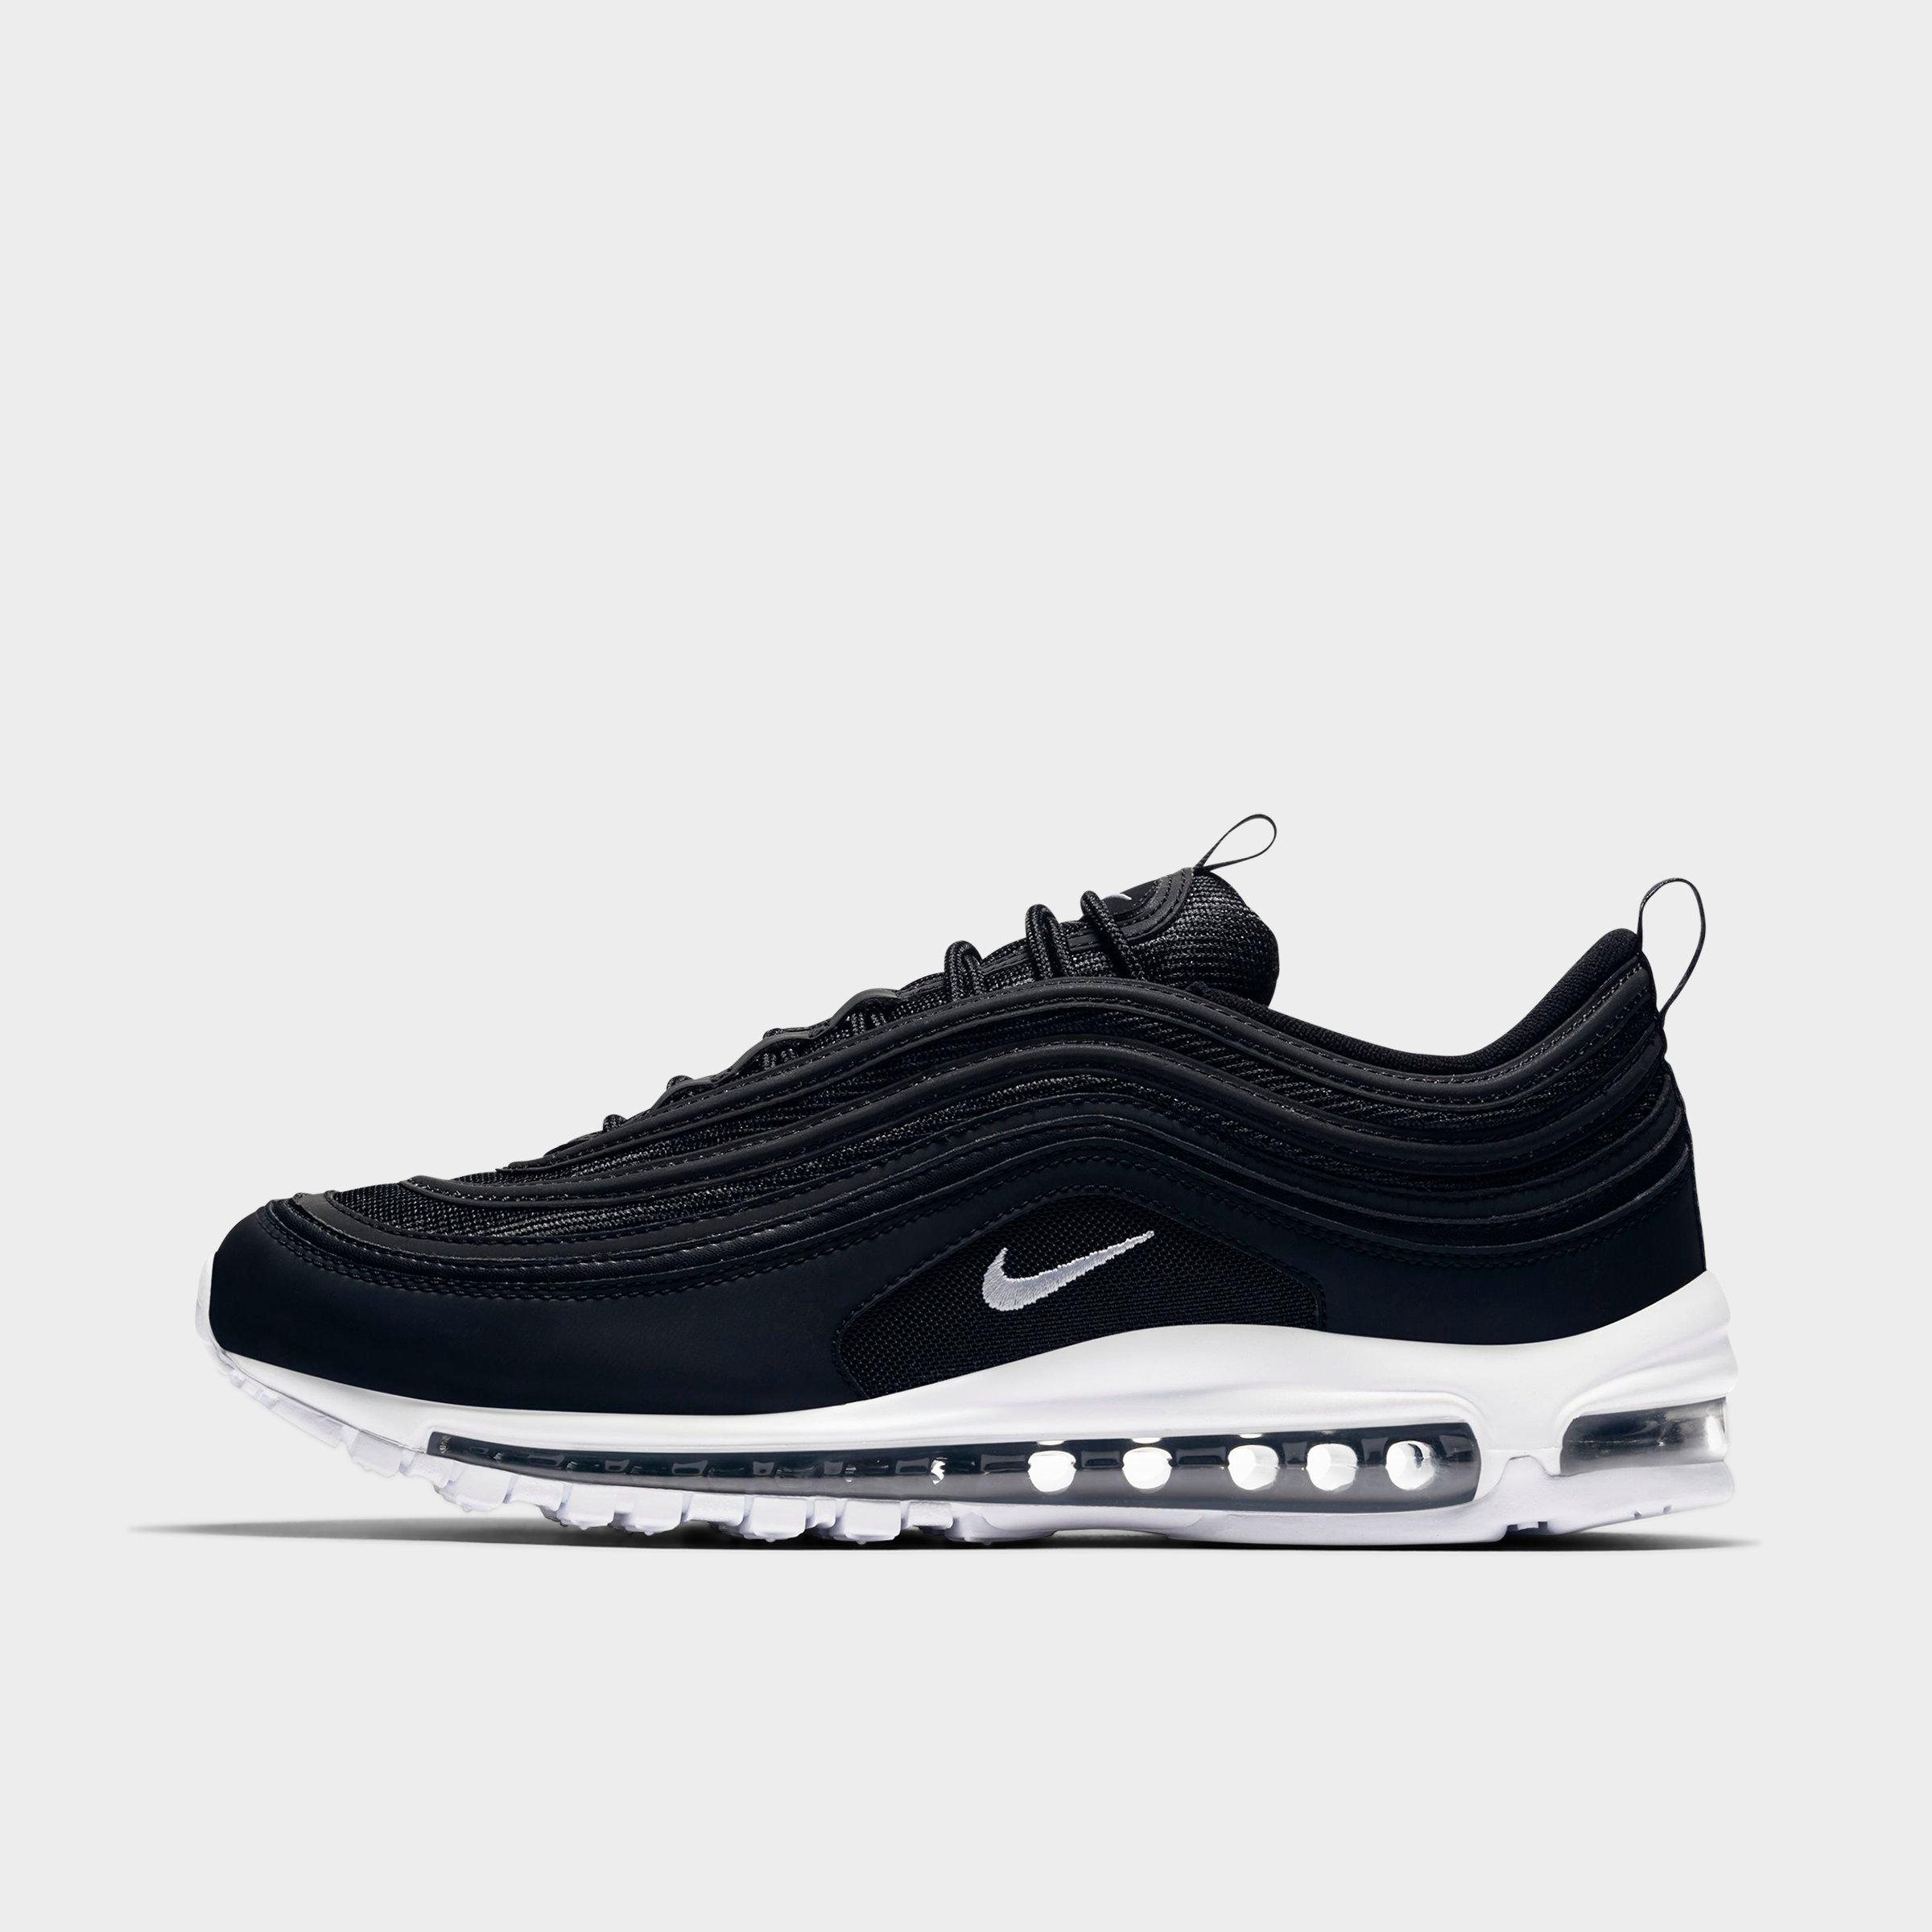 Nike Air Max 97 Shoes \u0026 Sneakers | Finish Line